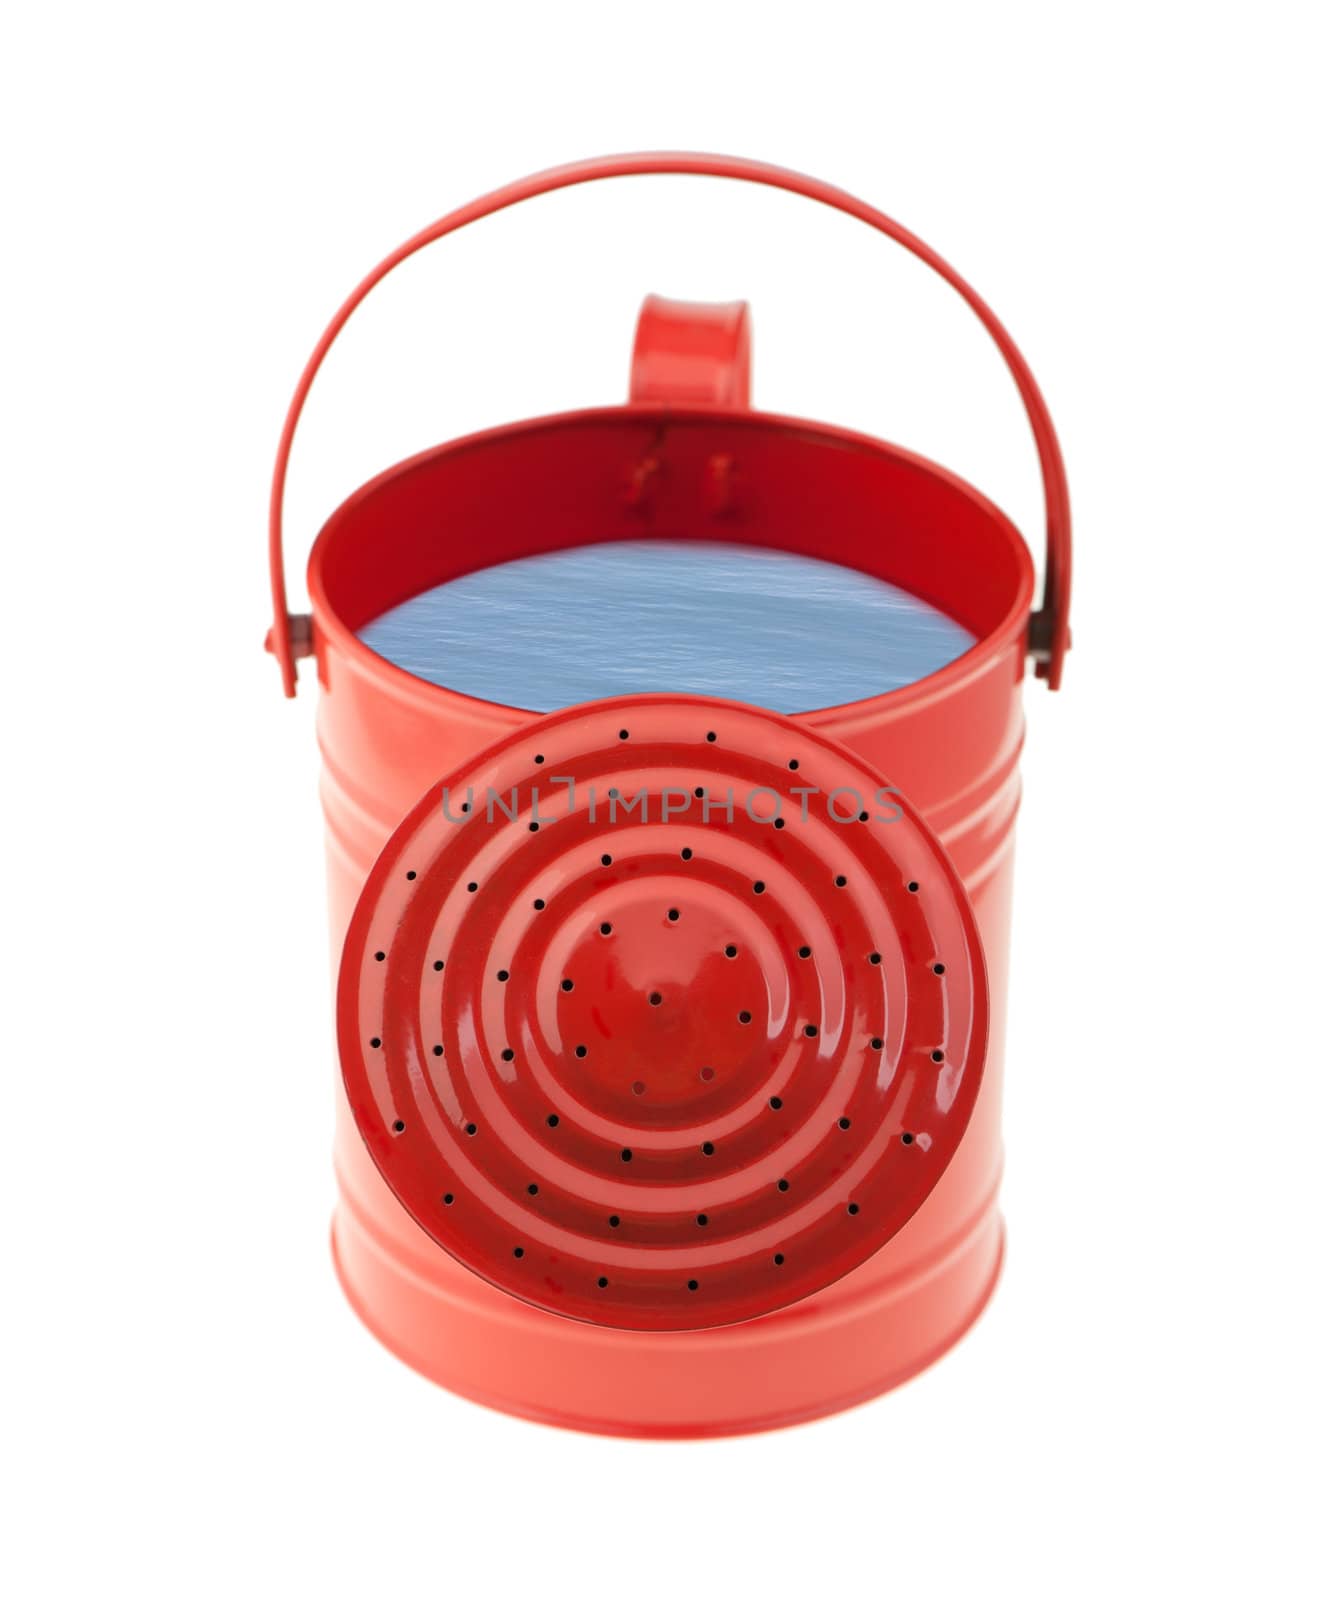 Red watering can. It is isolated on a white background